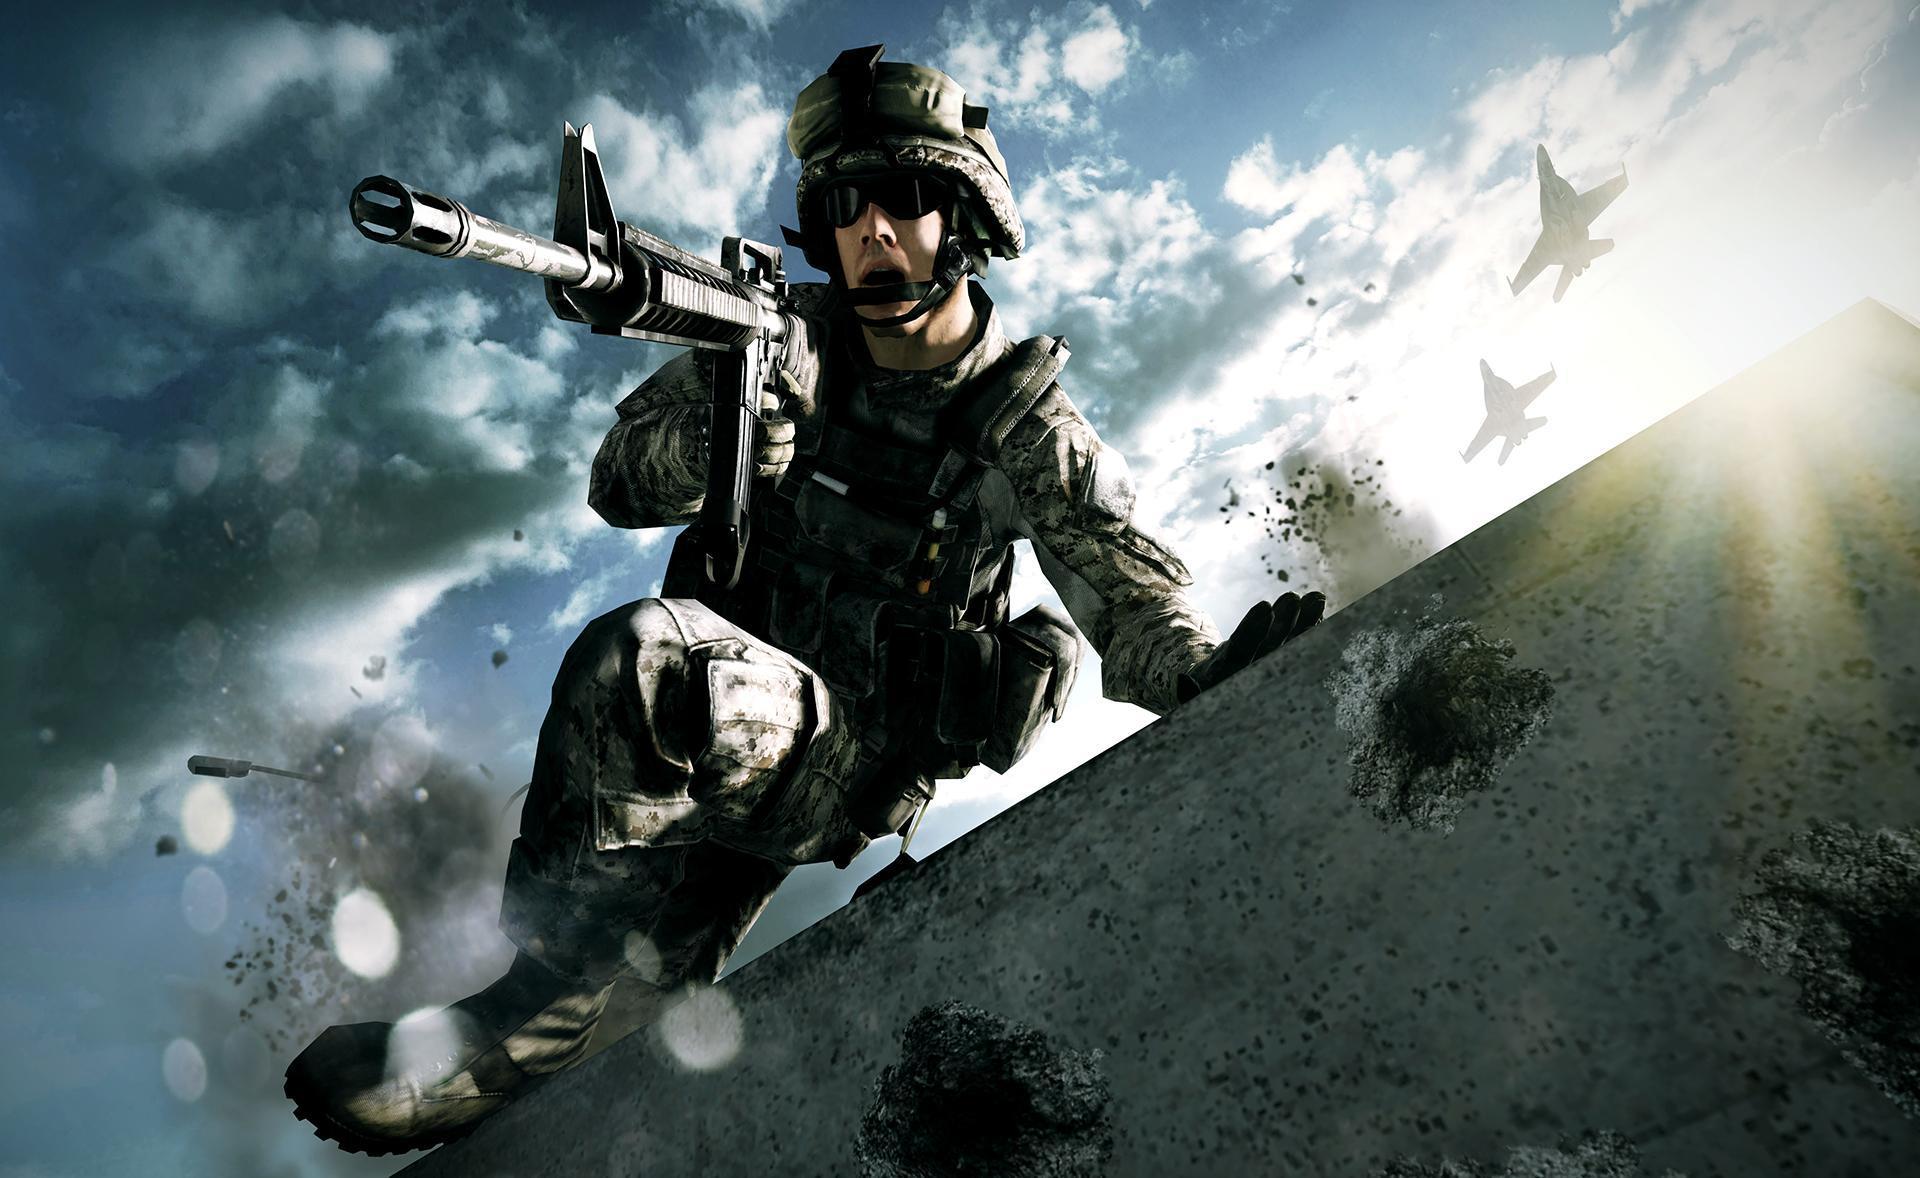 Cool Army Anction Android Wallpaper 7681 Wallpaper. High